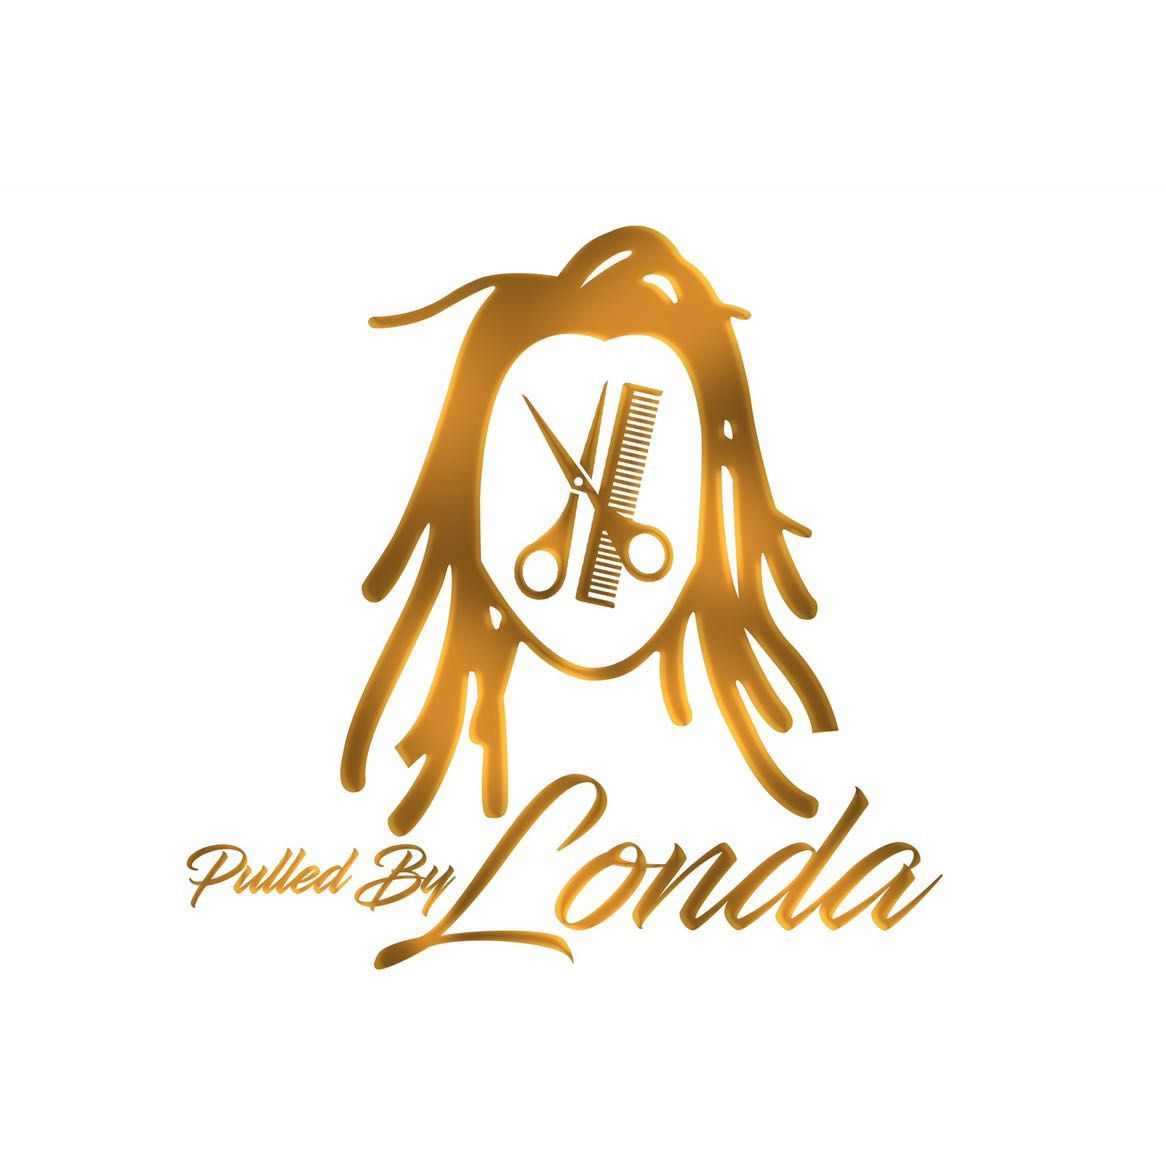 Pulled By Londa, 2638 S Harbor City Blvd, Melbourne, 32901